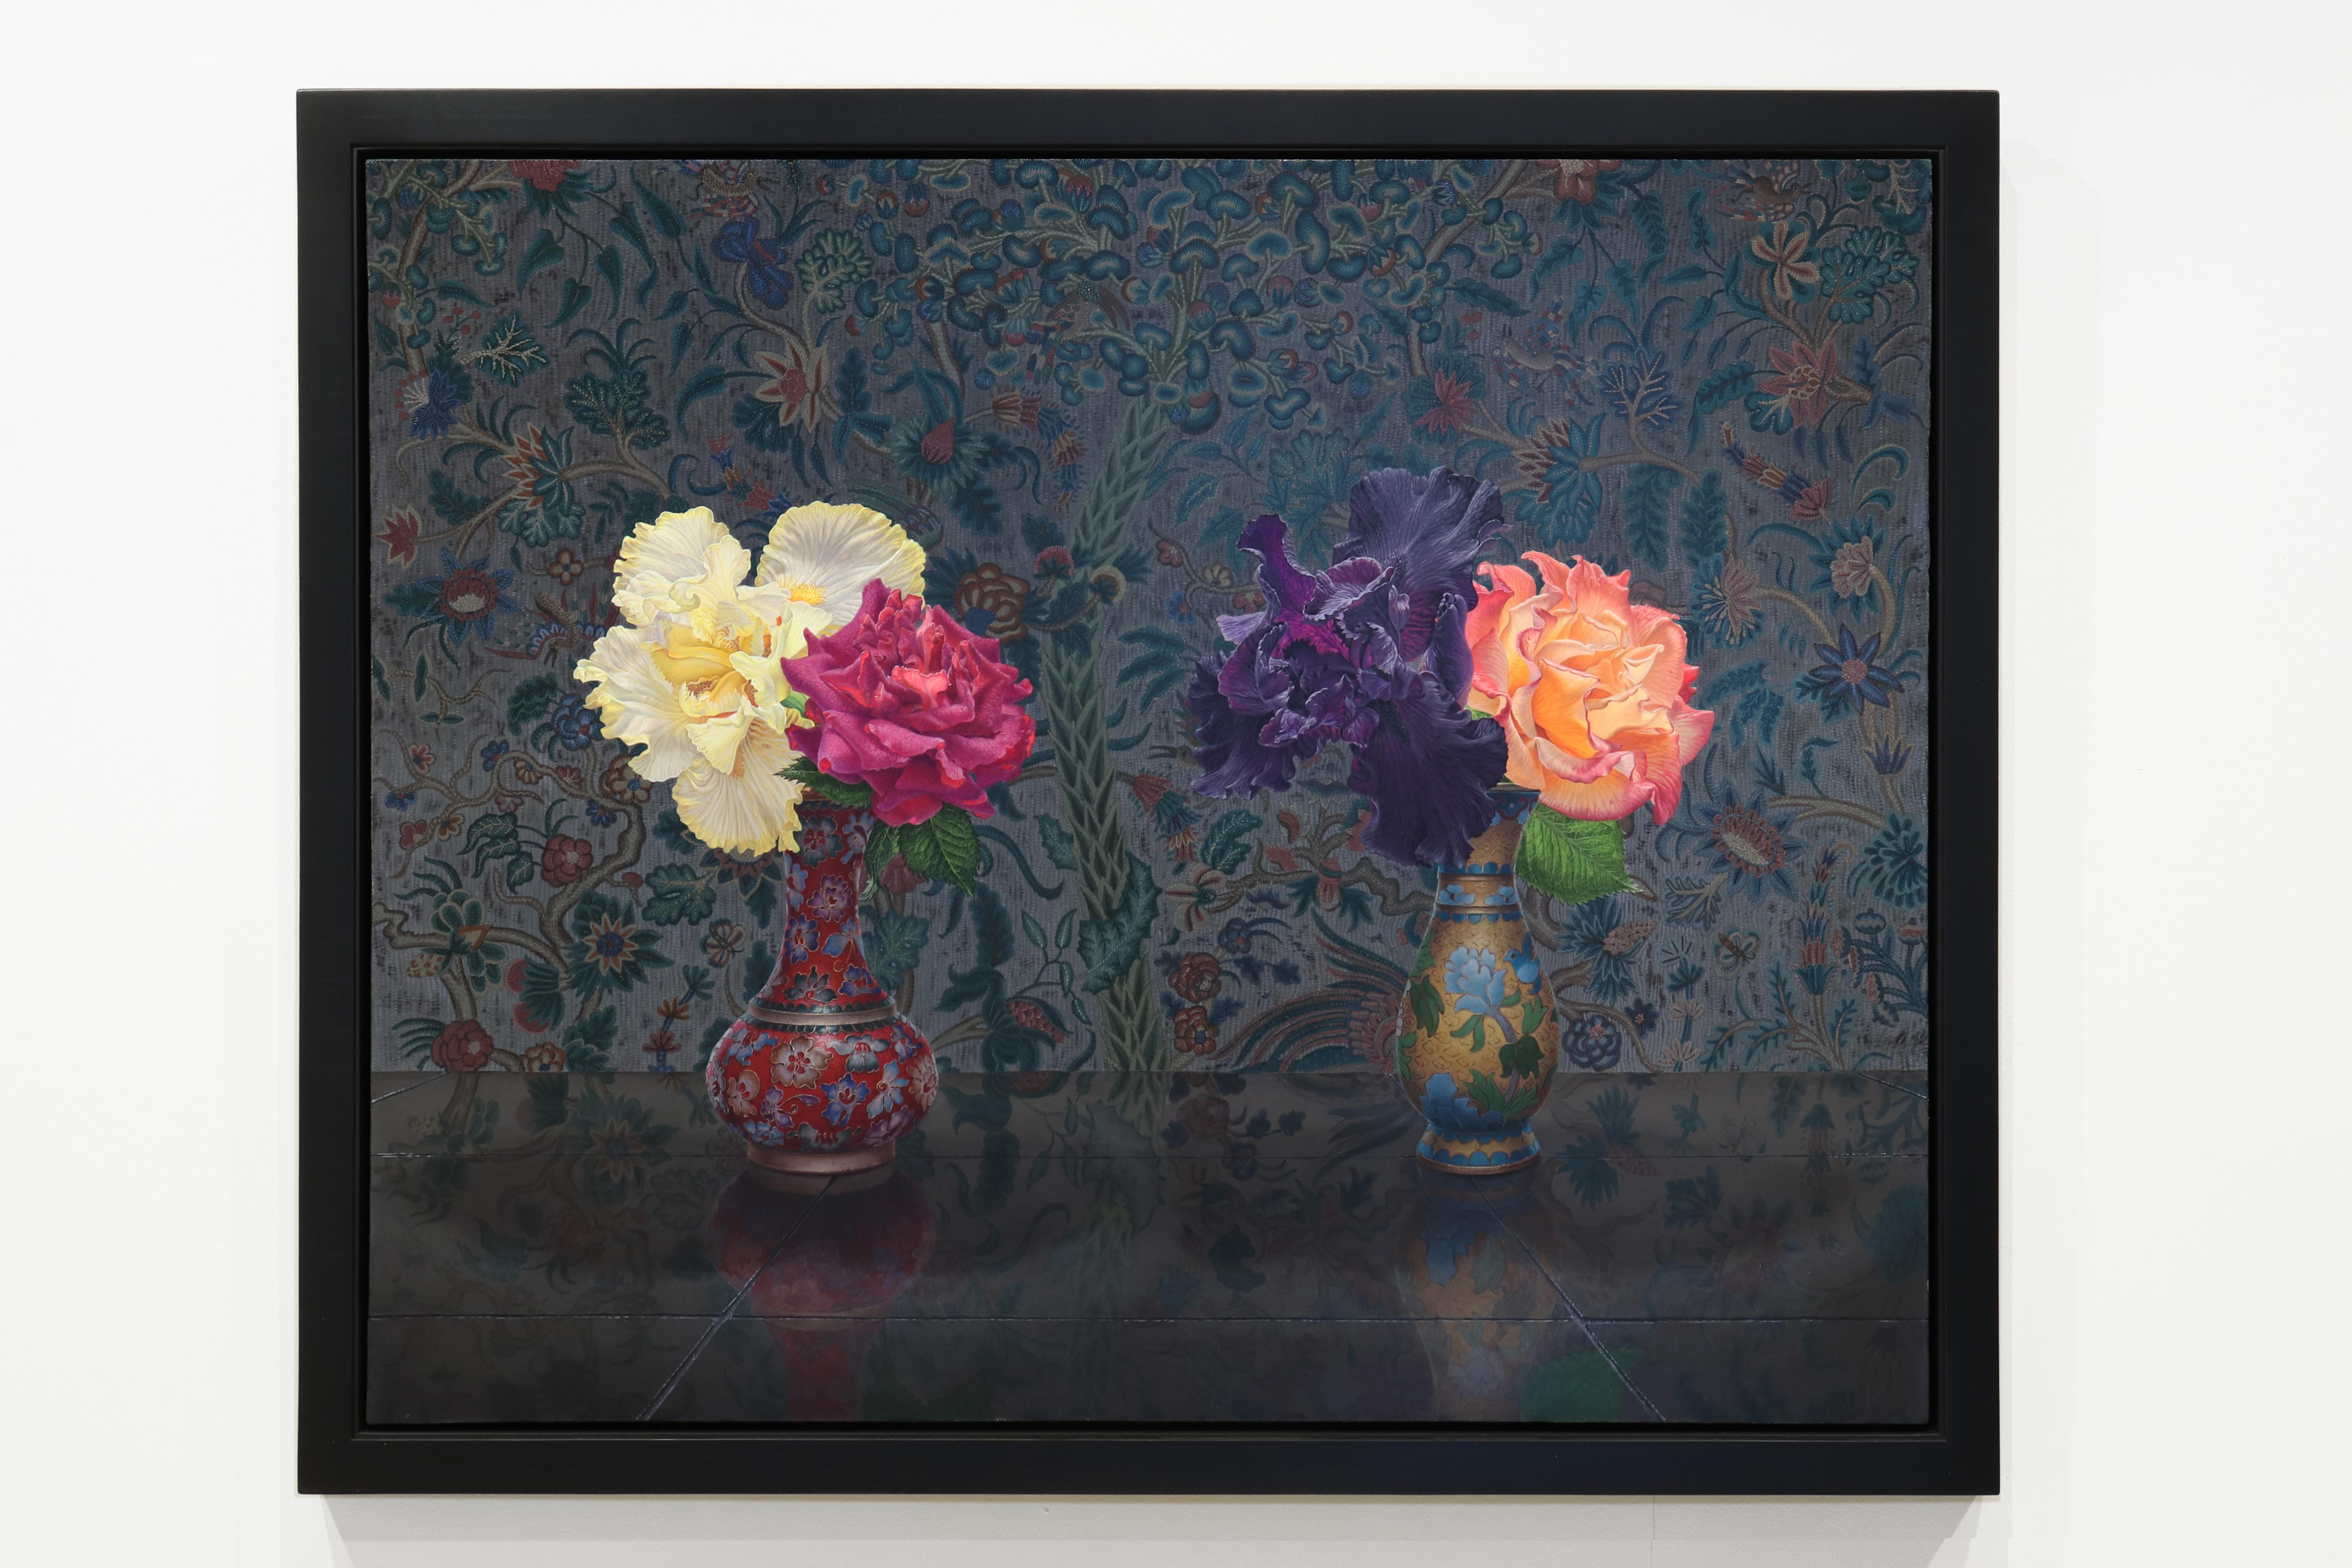 IRIS AND ROSE, still-life, flowers in vase, vibrant colors, tapestry - Painting by Eric Wert